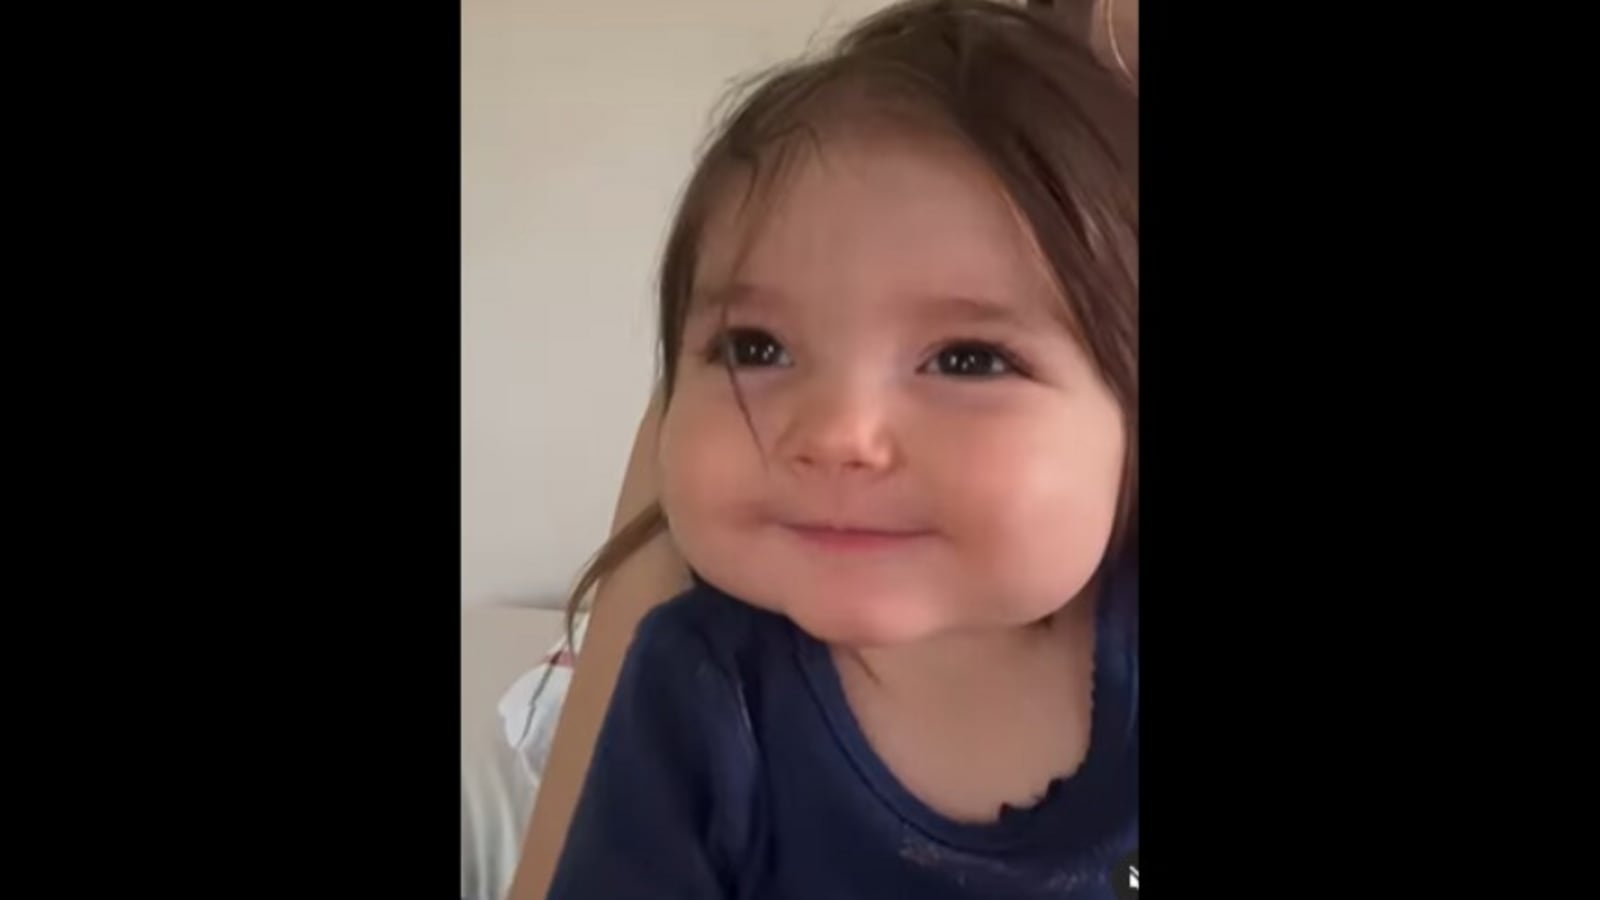 Every time this cute baby girl sneezes, she smiles. Watch adorable video